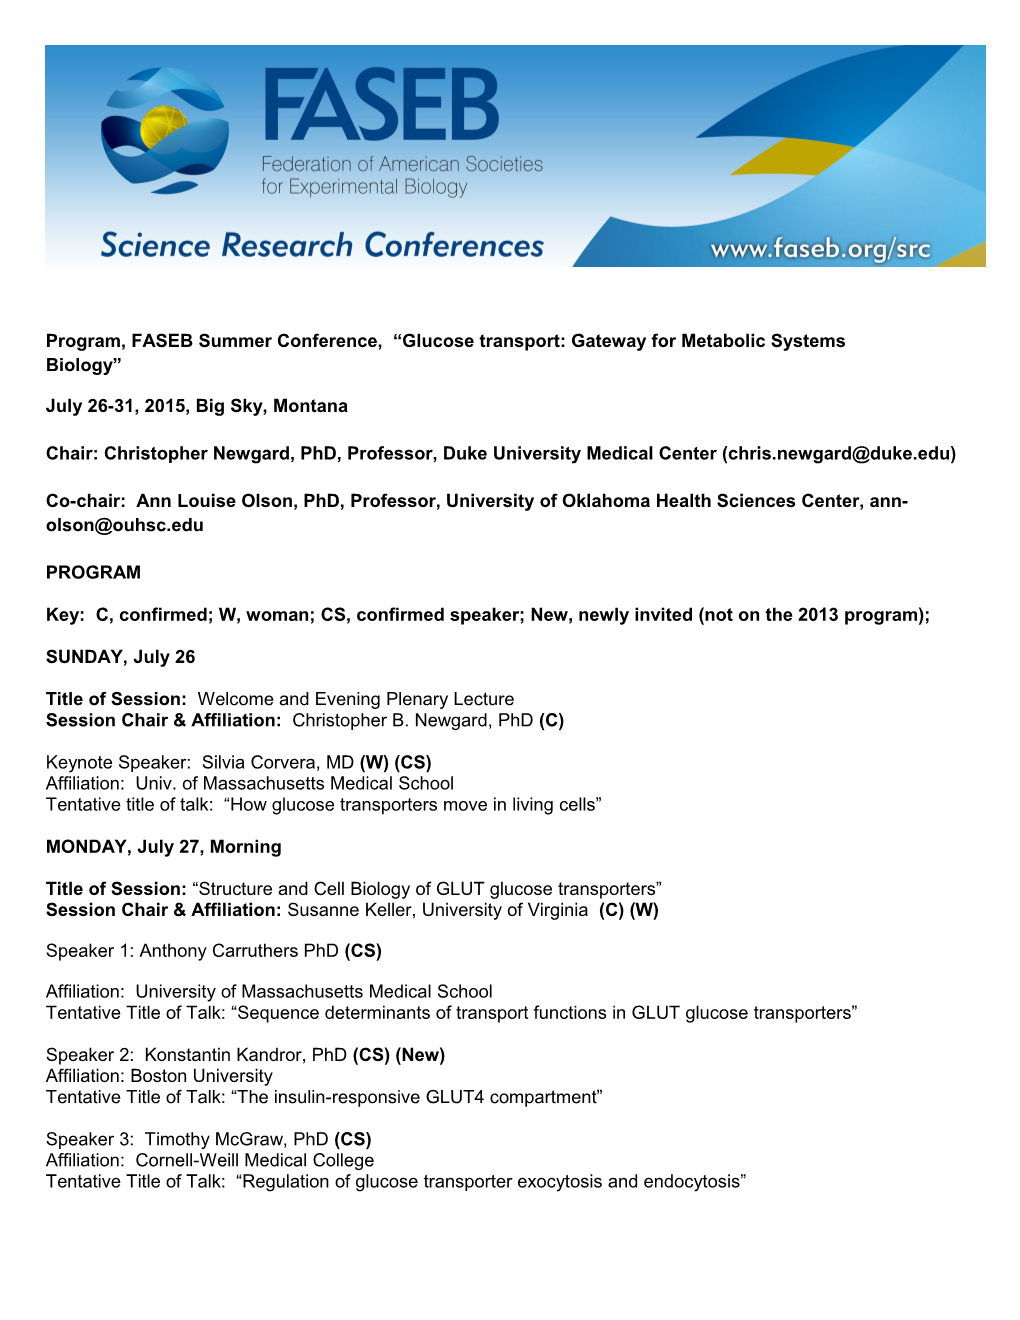 Program, FASEB Summer Conference, Glucose Transport: Gateway for Metabolic Systems Biology